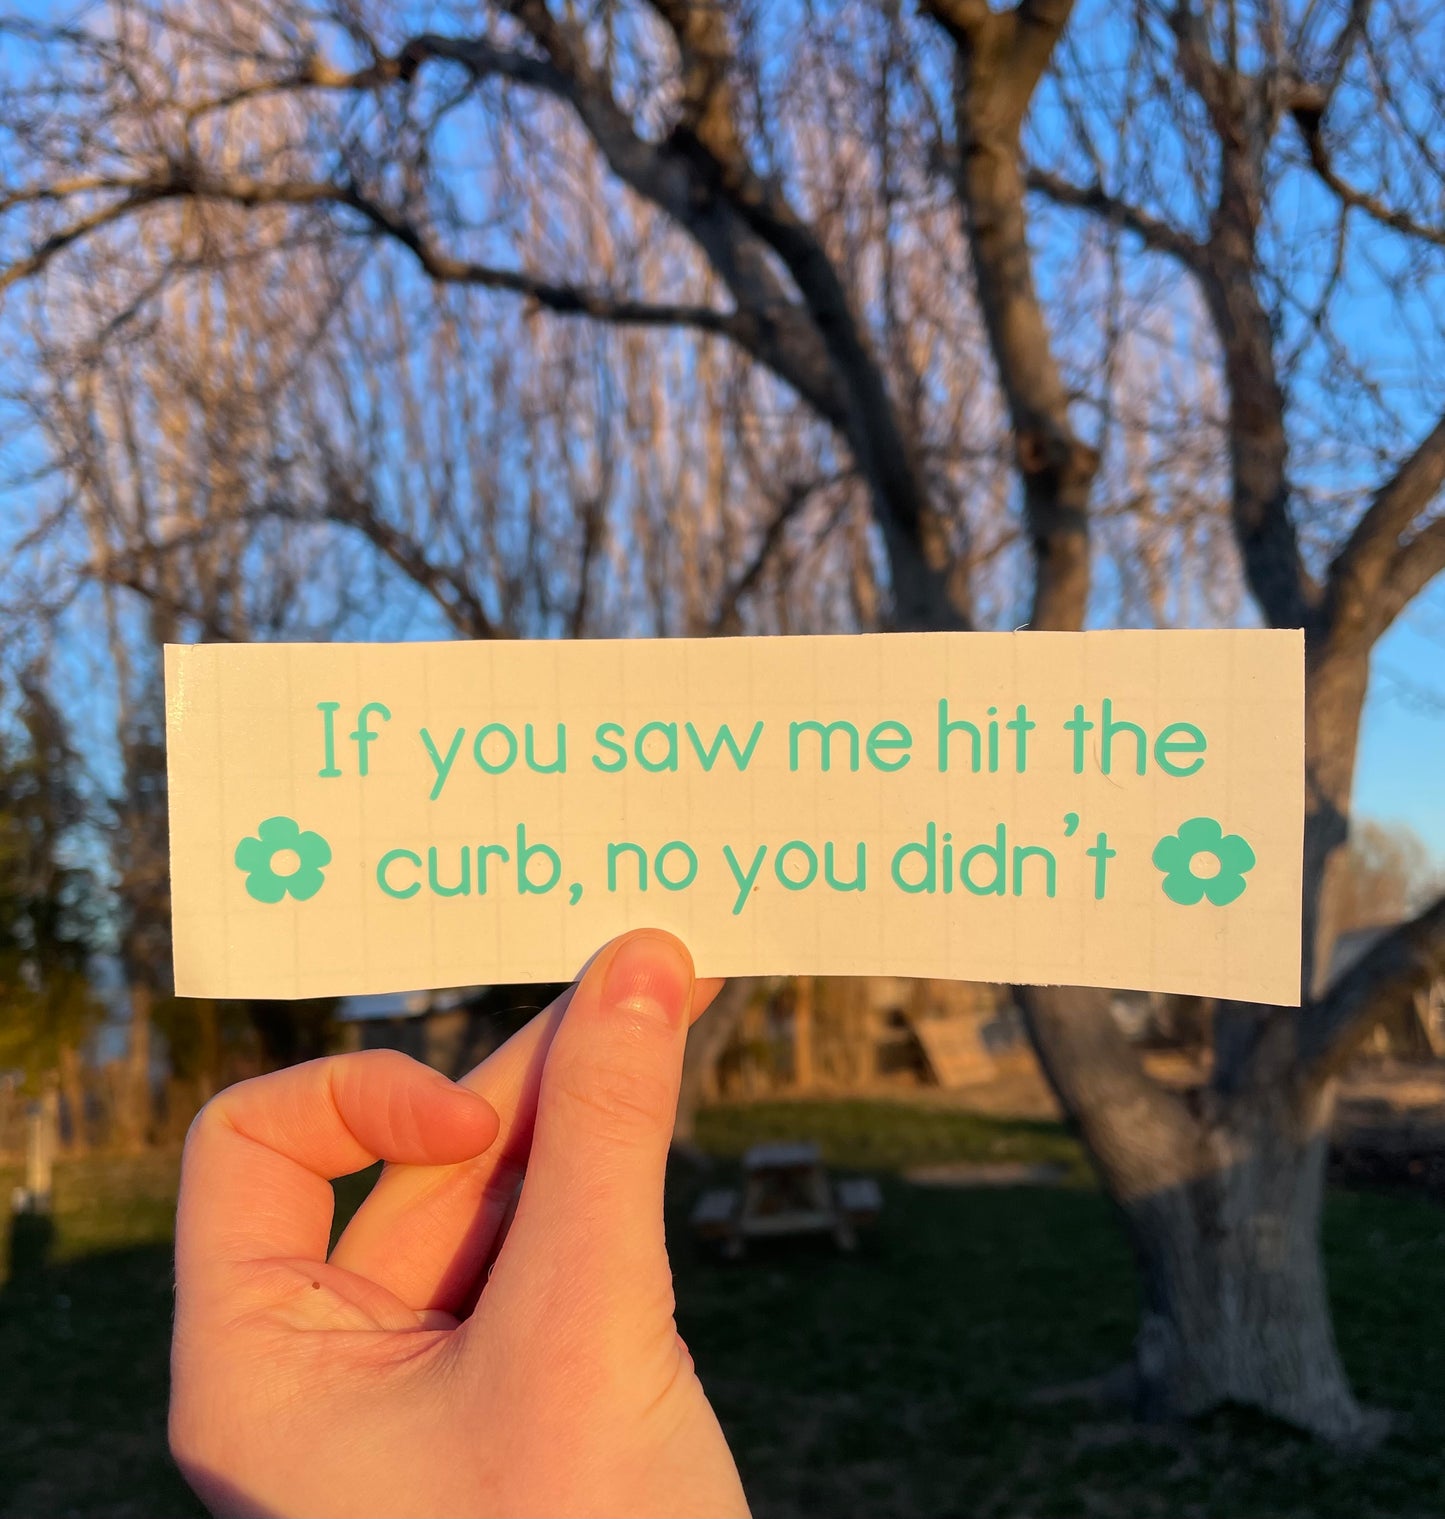 “If you saw me hit the curb, no you didn’t” car decal